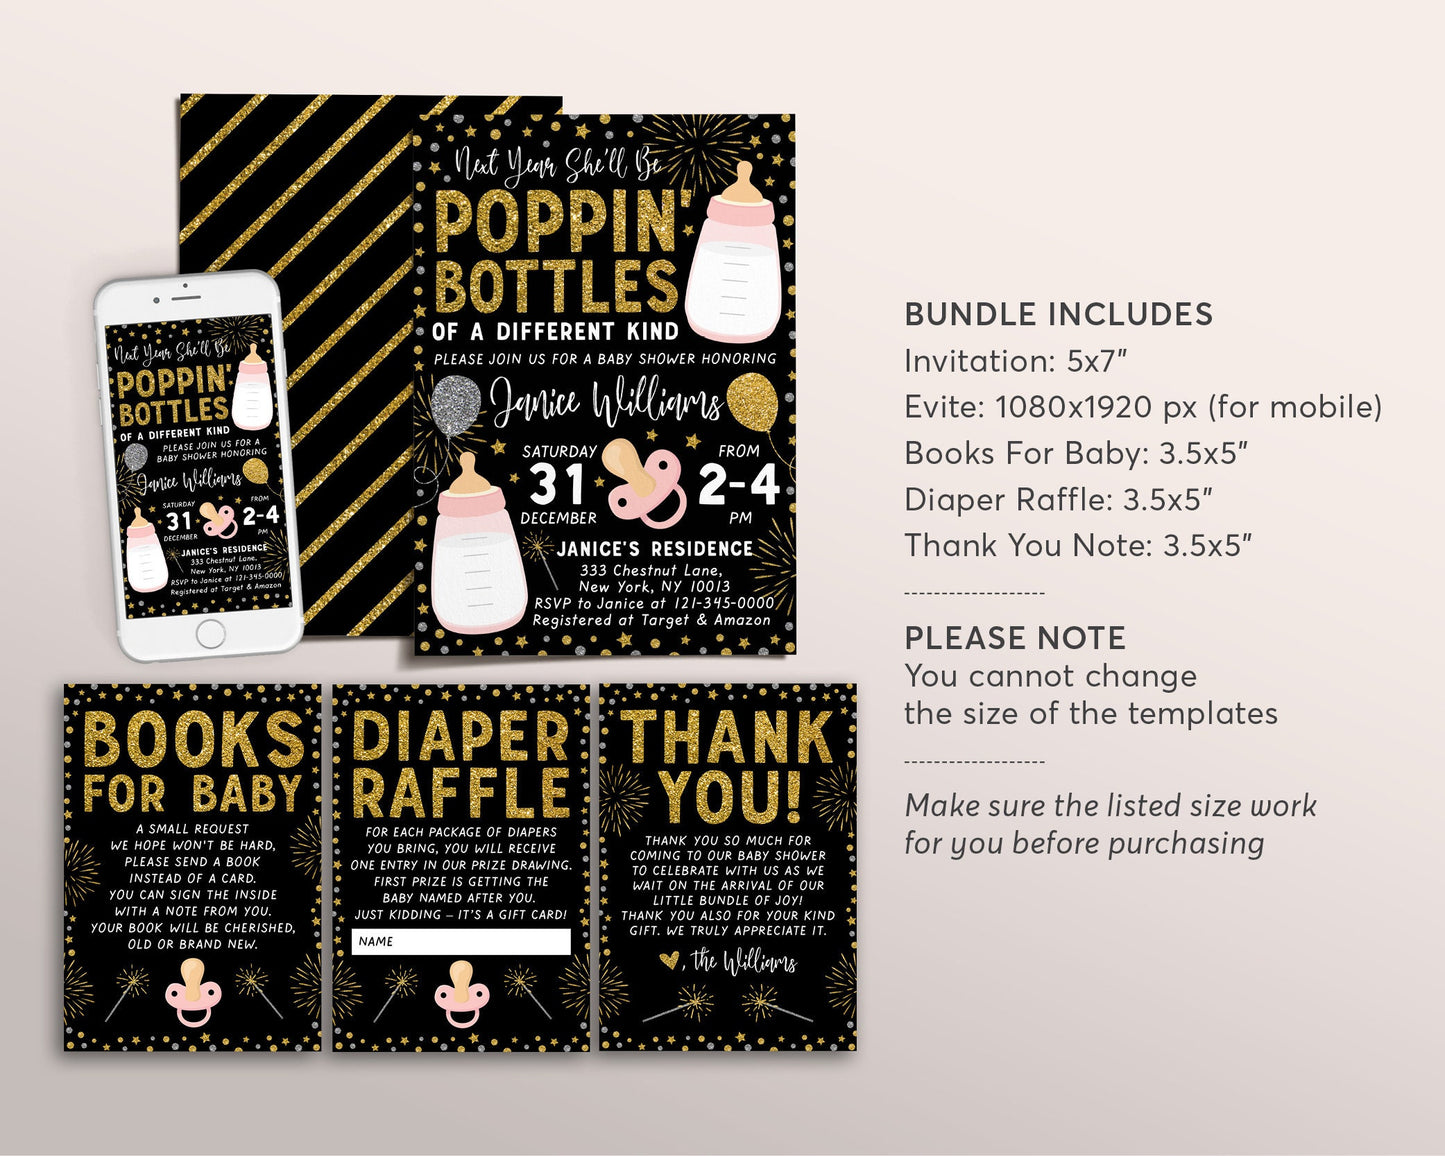 New Years GIRL Baby Shower BUNDLE Invitation Suite Set Editable Template, Poppin Bottles Invite Books For Baby Diaper Raffle Thank You DIY